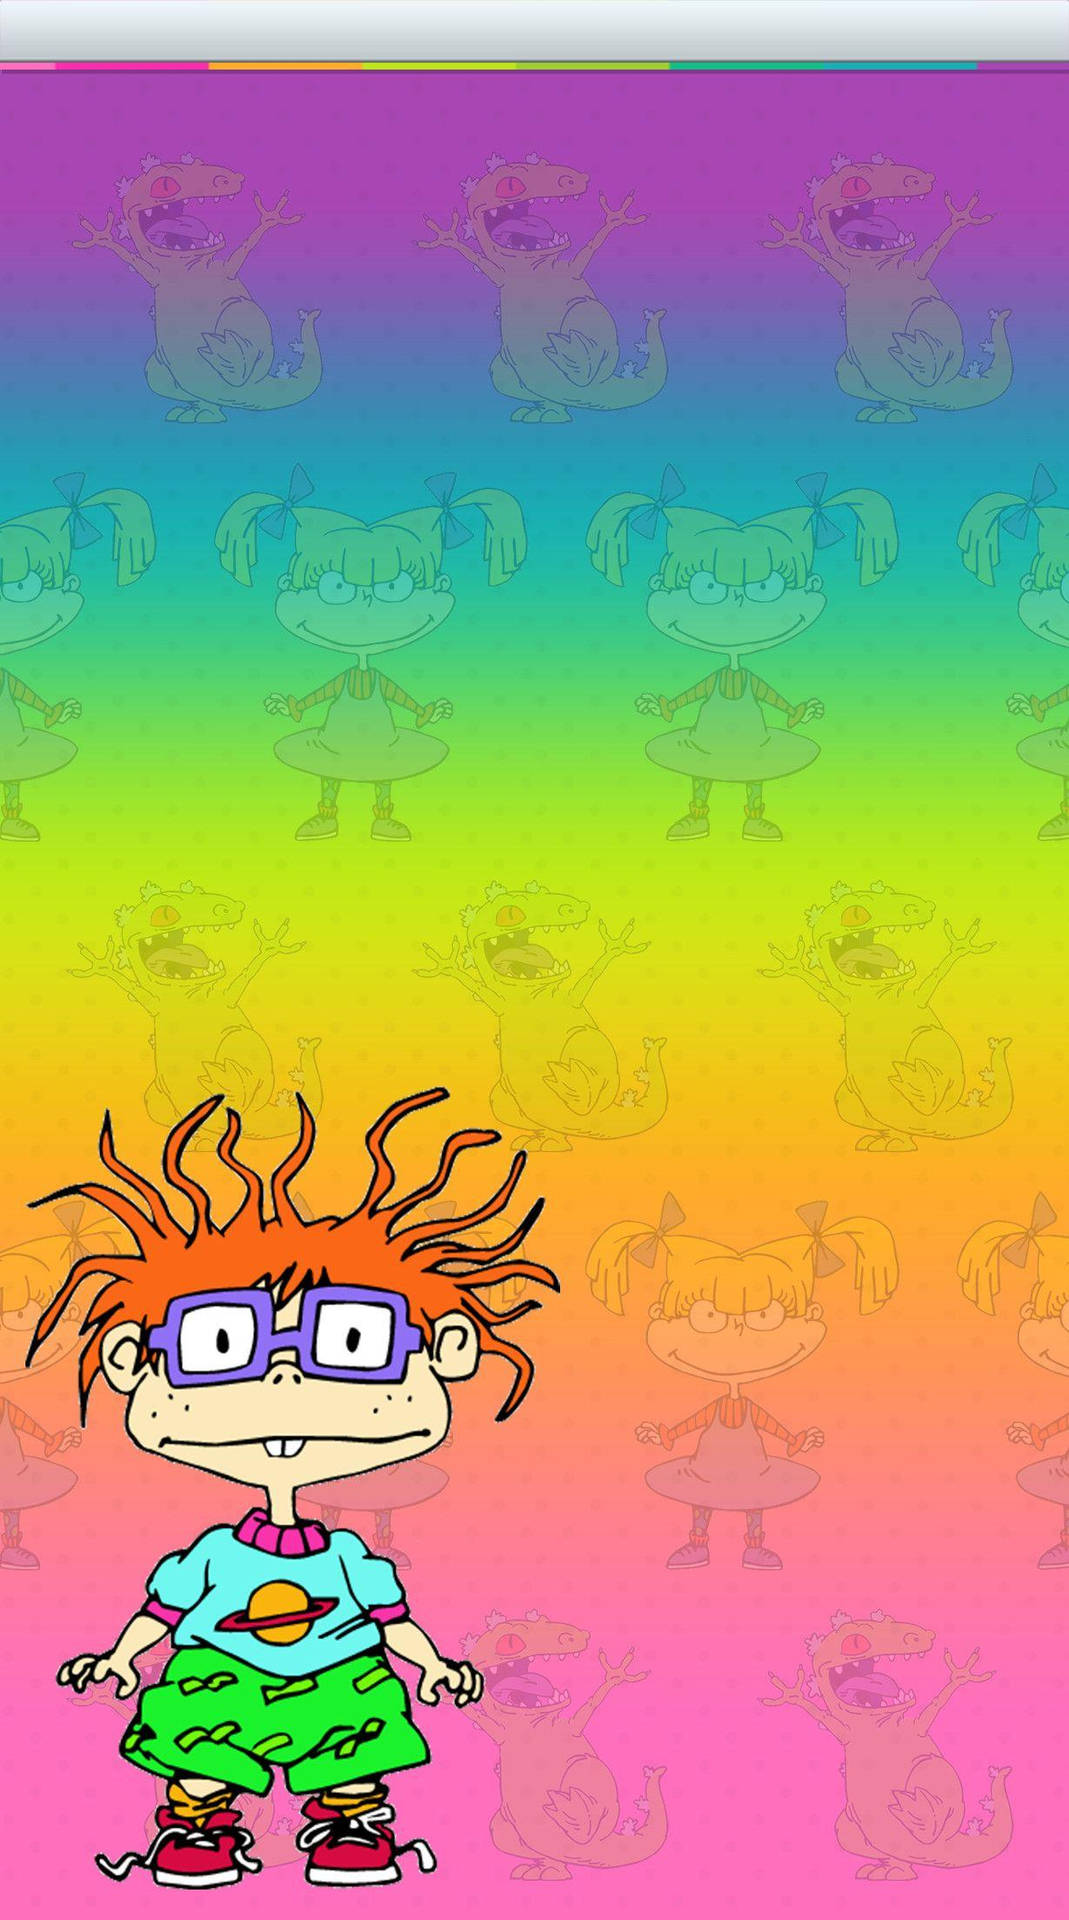 A Cartoon Girl With Glasses And A Rainbow Background